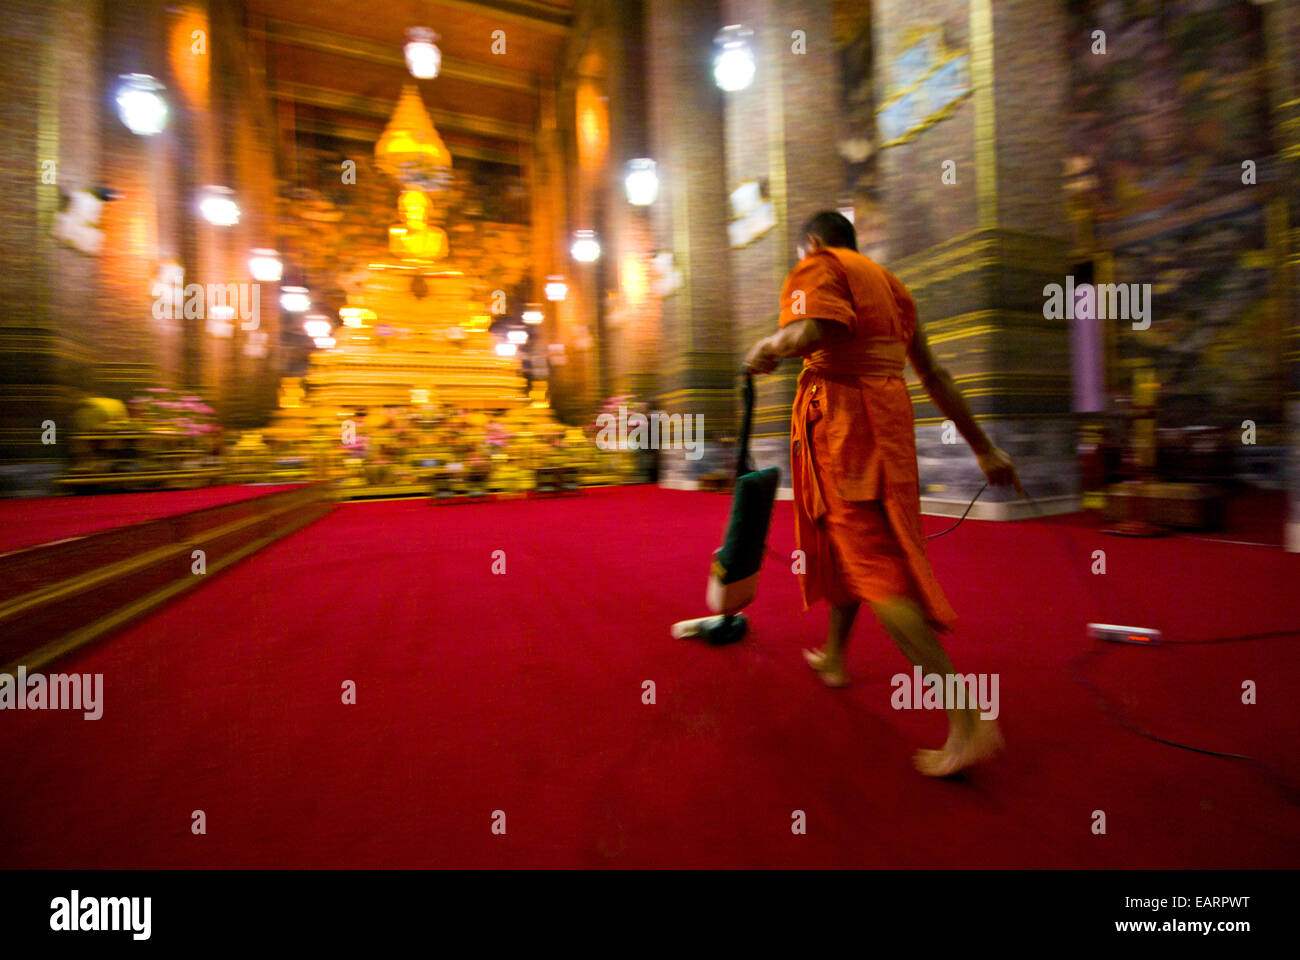 A Buddhist Monk vacuums the chapel's red carpet after evening prayer. Stock Photo